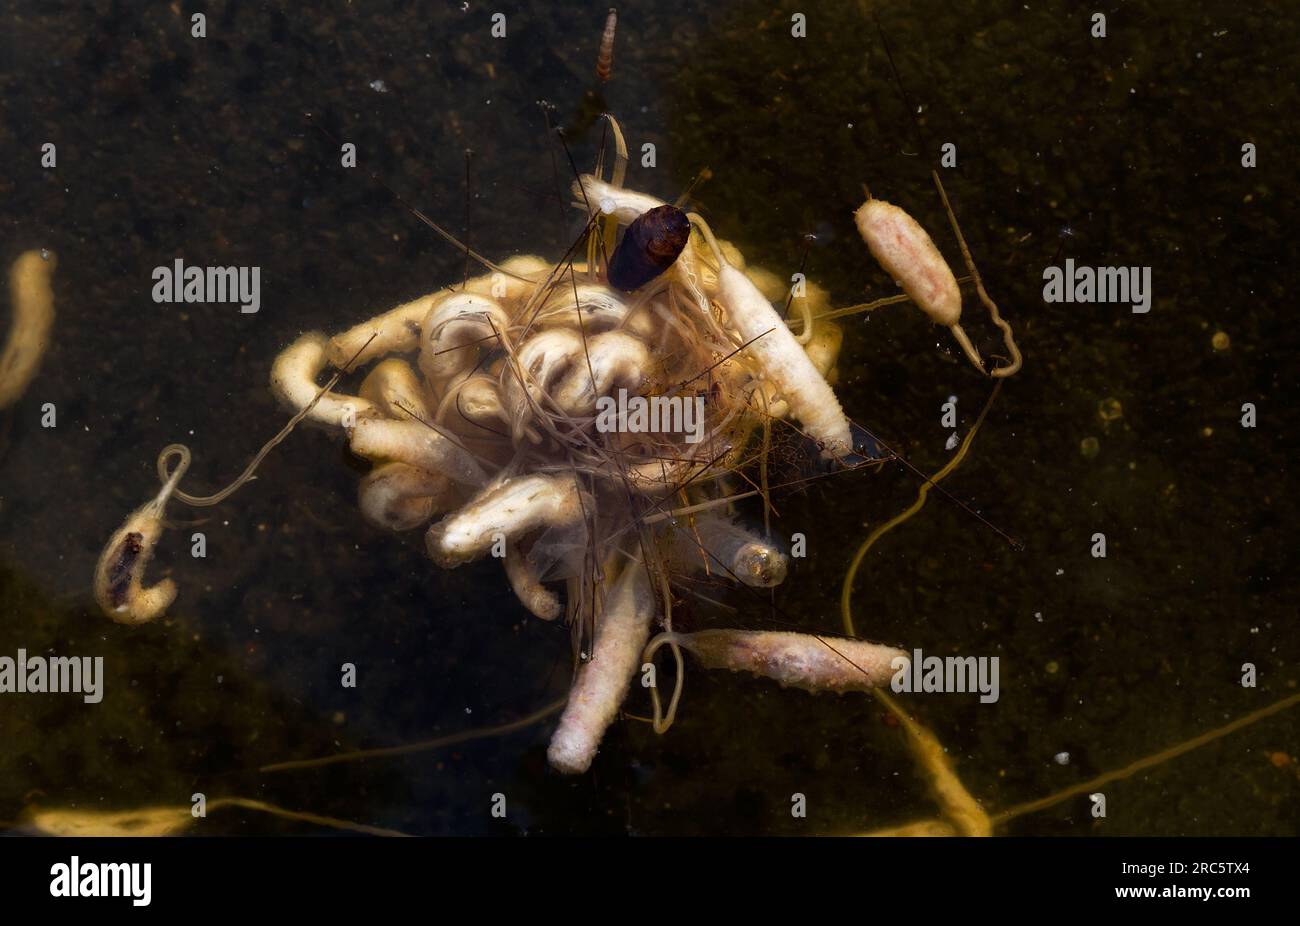 Clumb of larvae of the Rat-tailed maggot in dark, oxygen-poor water Stock Photo